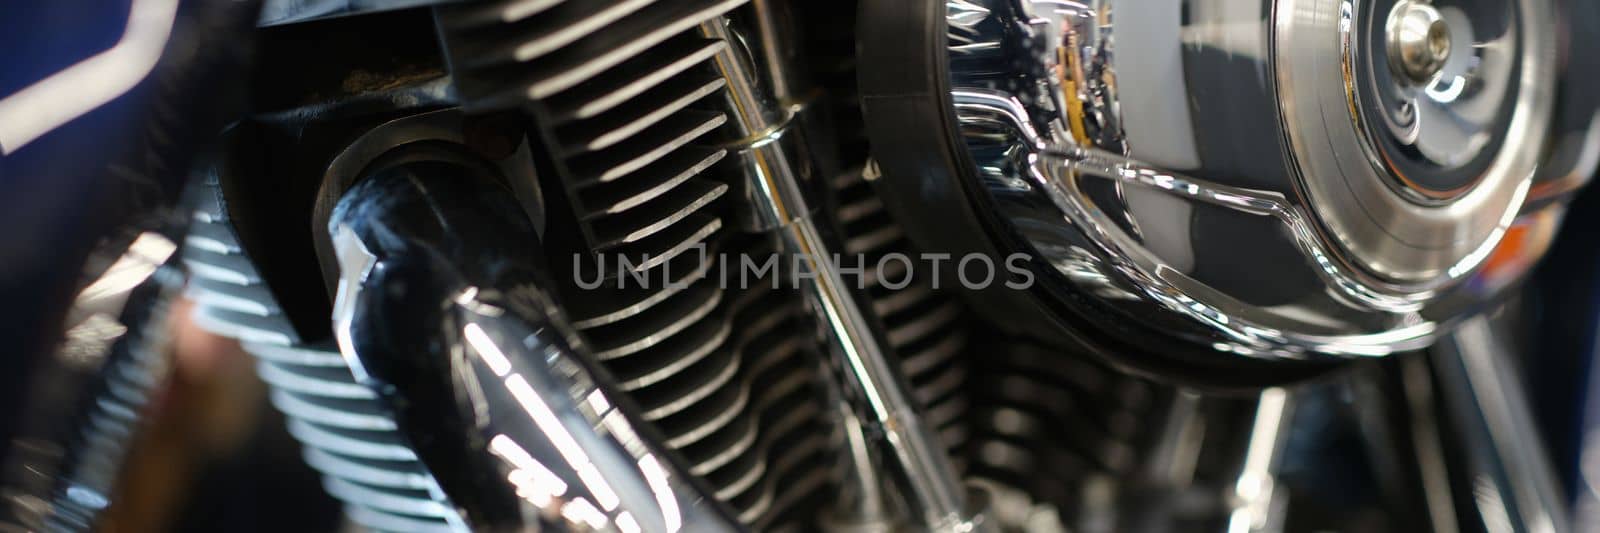 Chrome shiny motorcycle parts and motorcycle engine by kuprevich